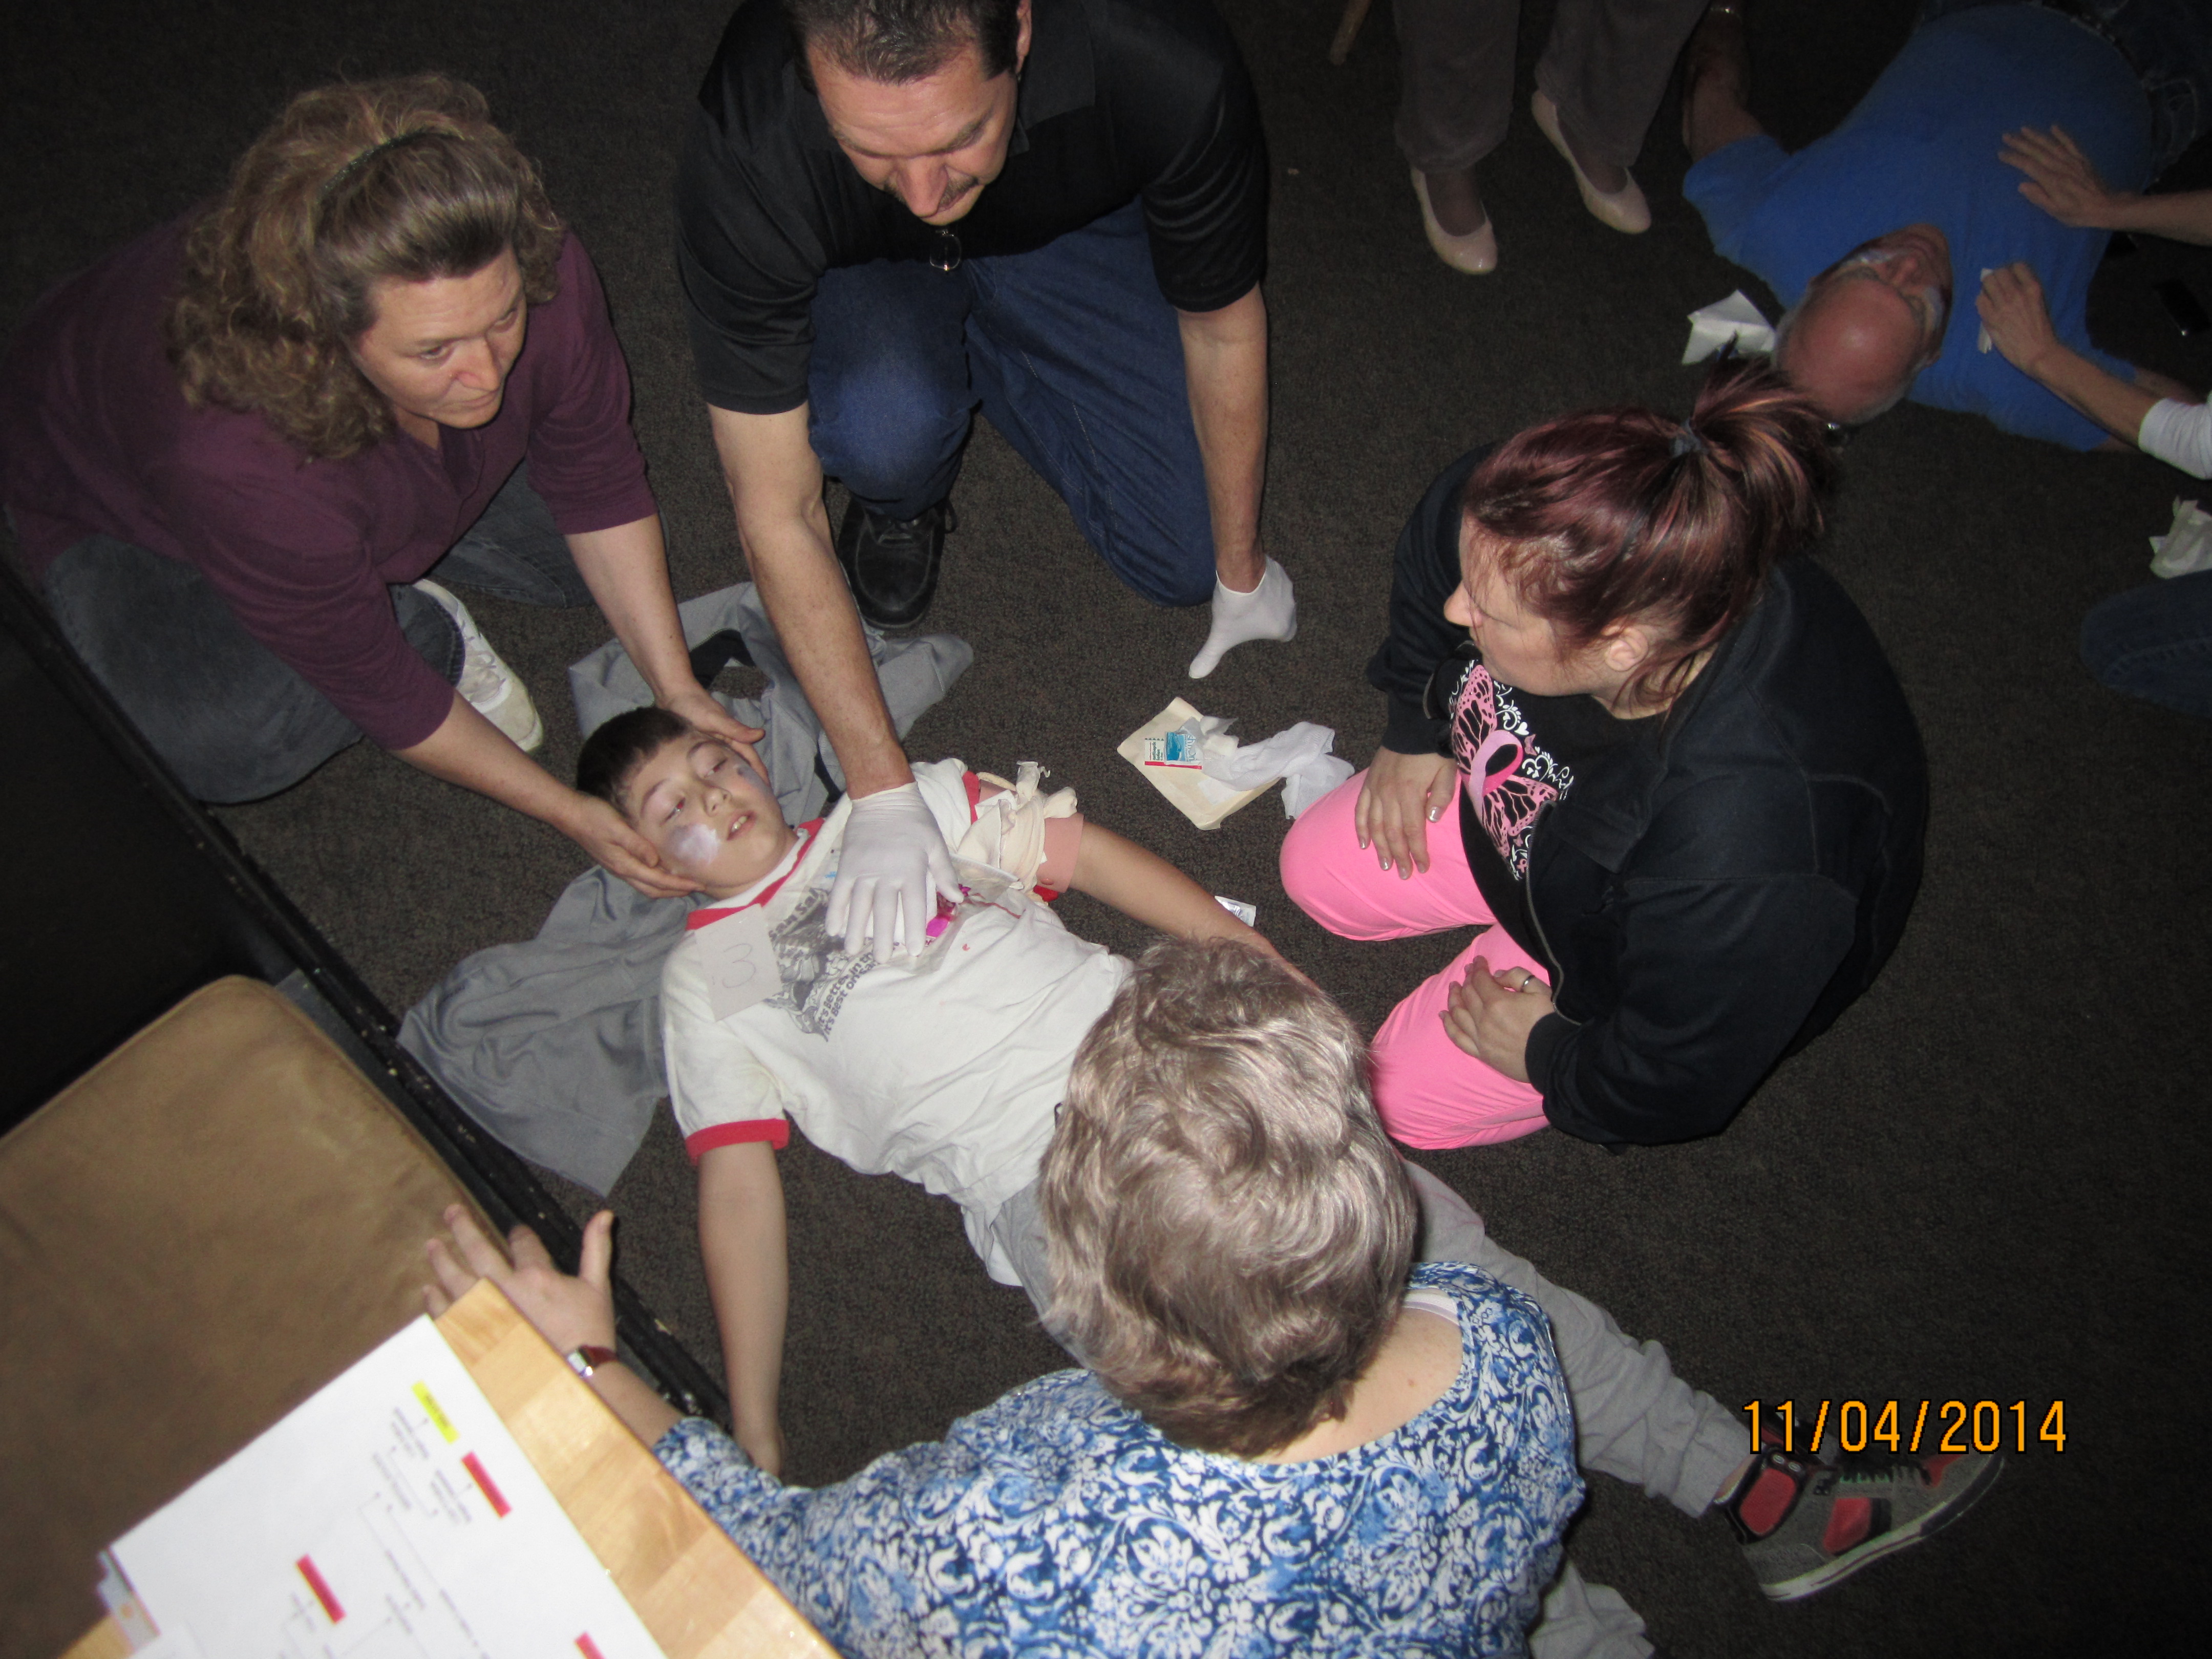 Photo: People providing triage on a patient